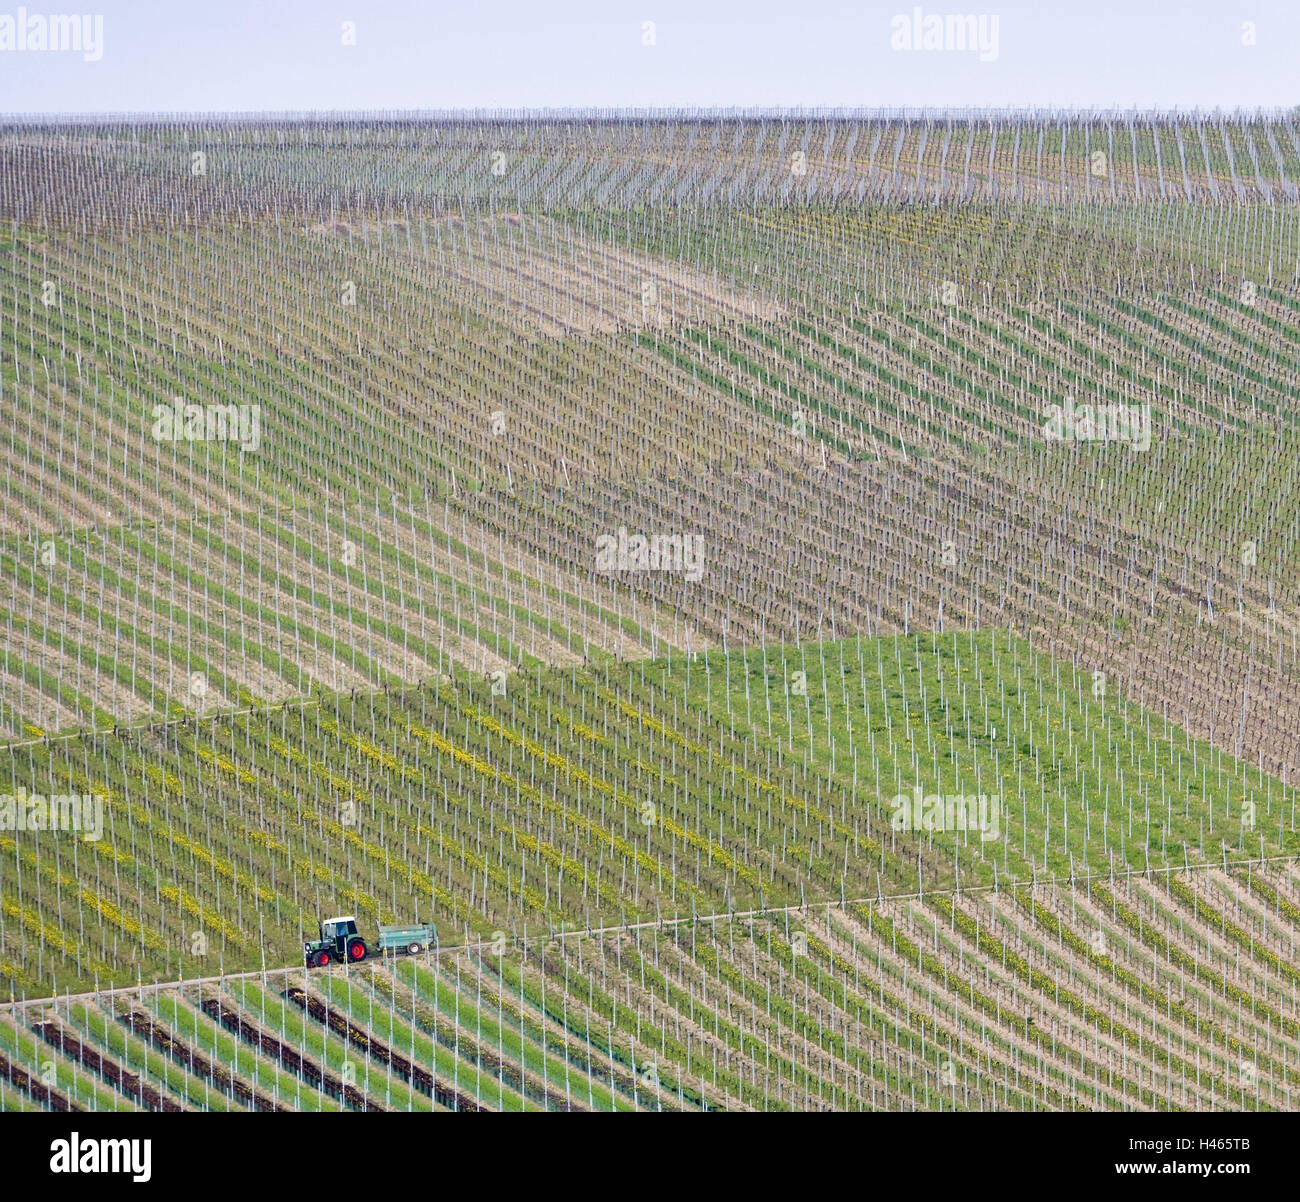 Germany, Bavaria, Franconia, wine-growing area, tractor, Main shore, wine, viticulture, wine fields, vineyards, inclination, vines, wine area, wine-growing area, fields, plots, agriculture, spring, Stock Photo